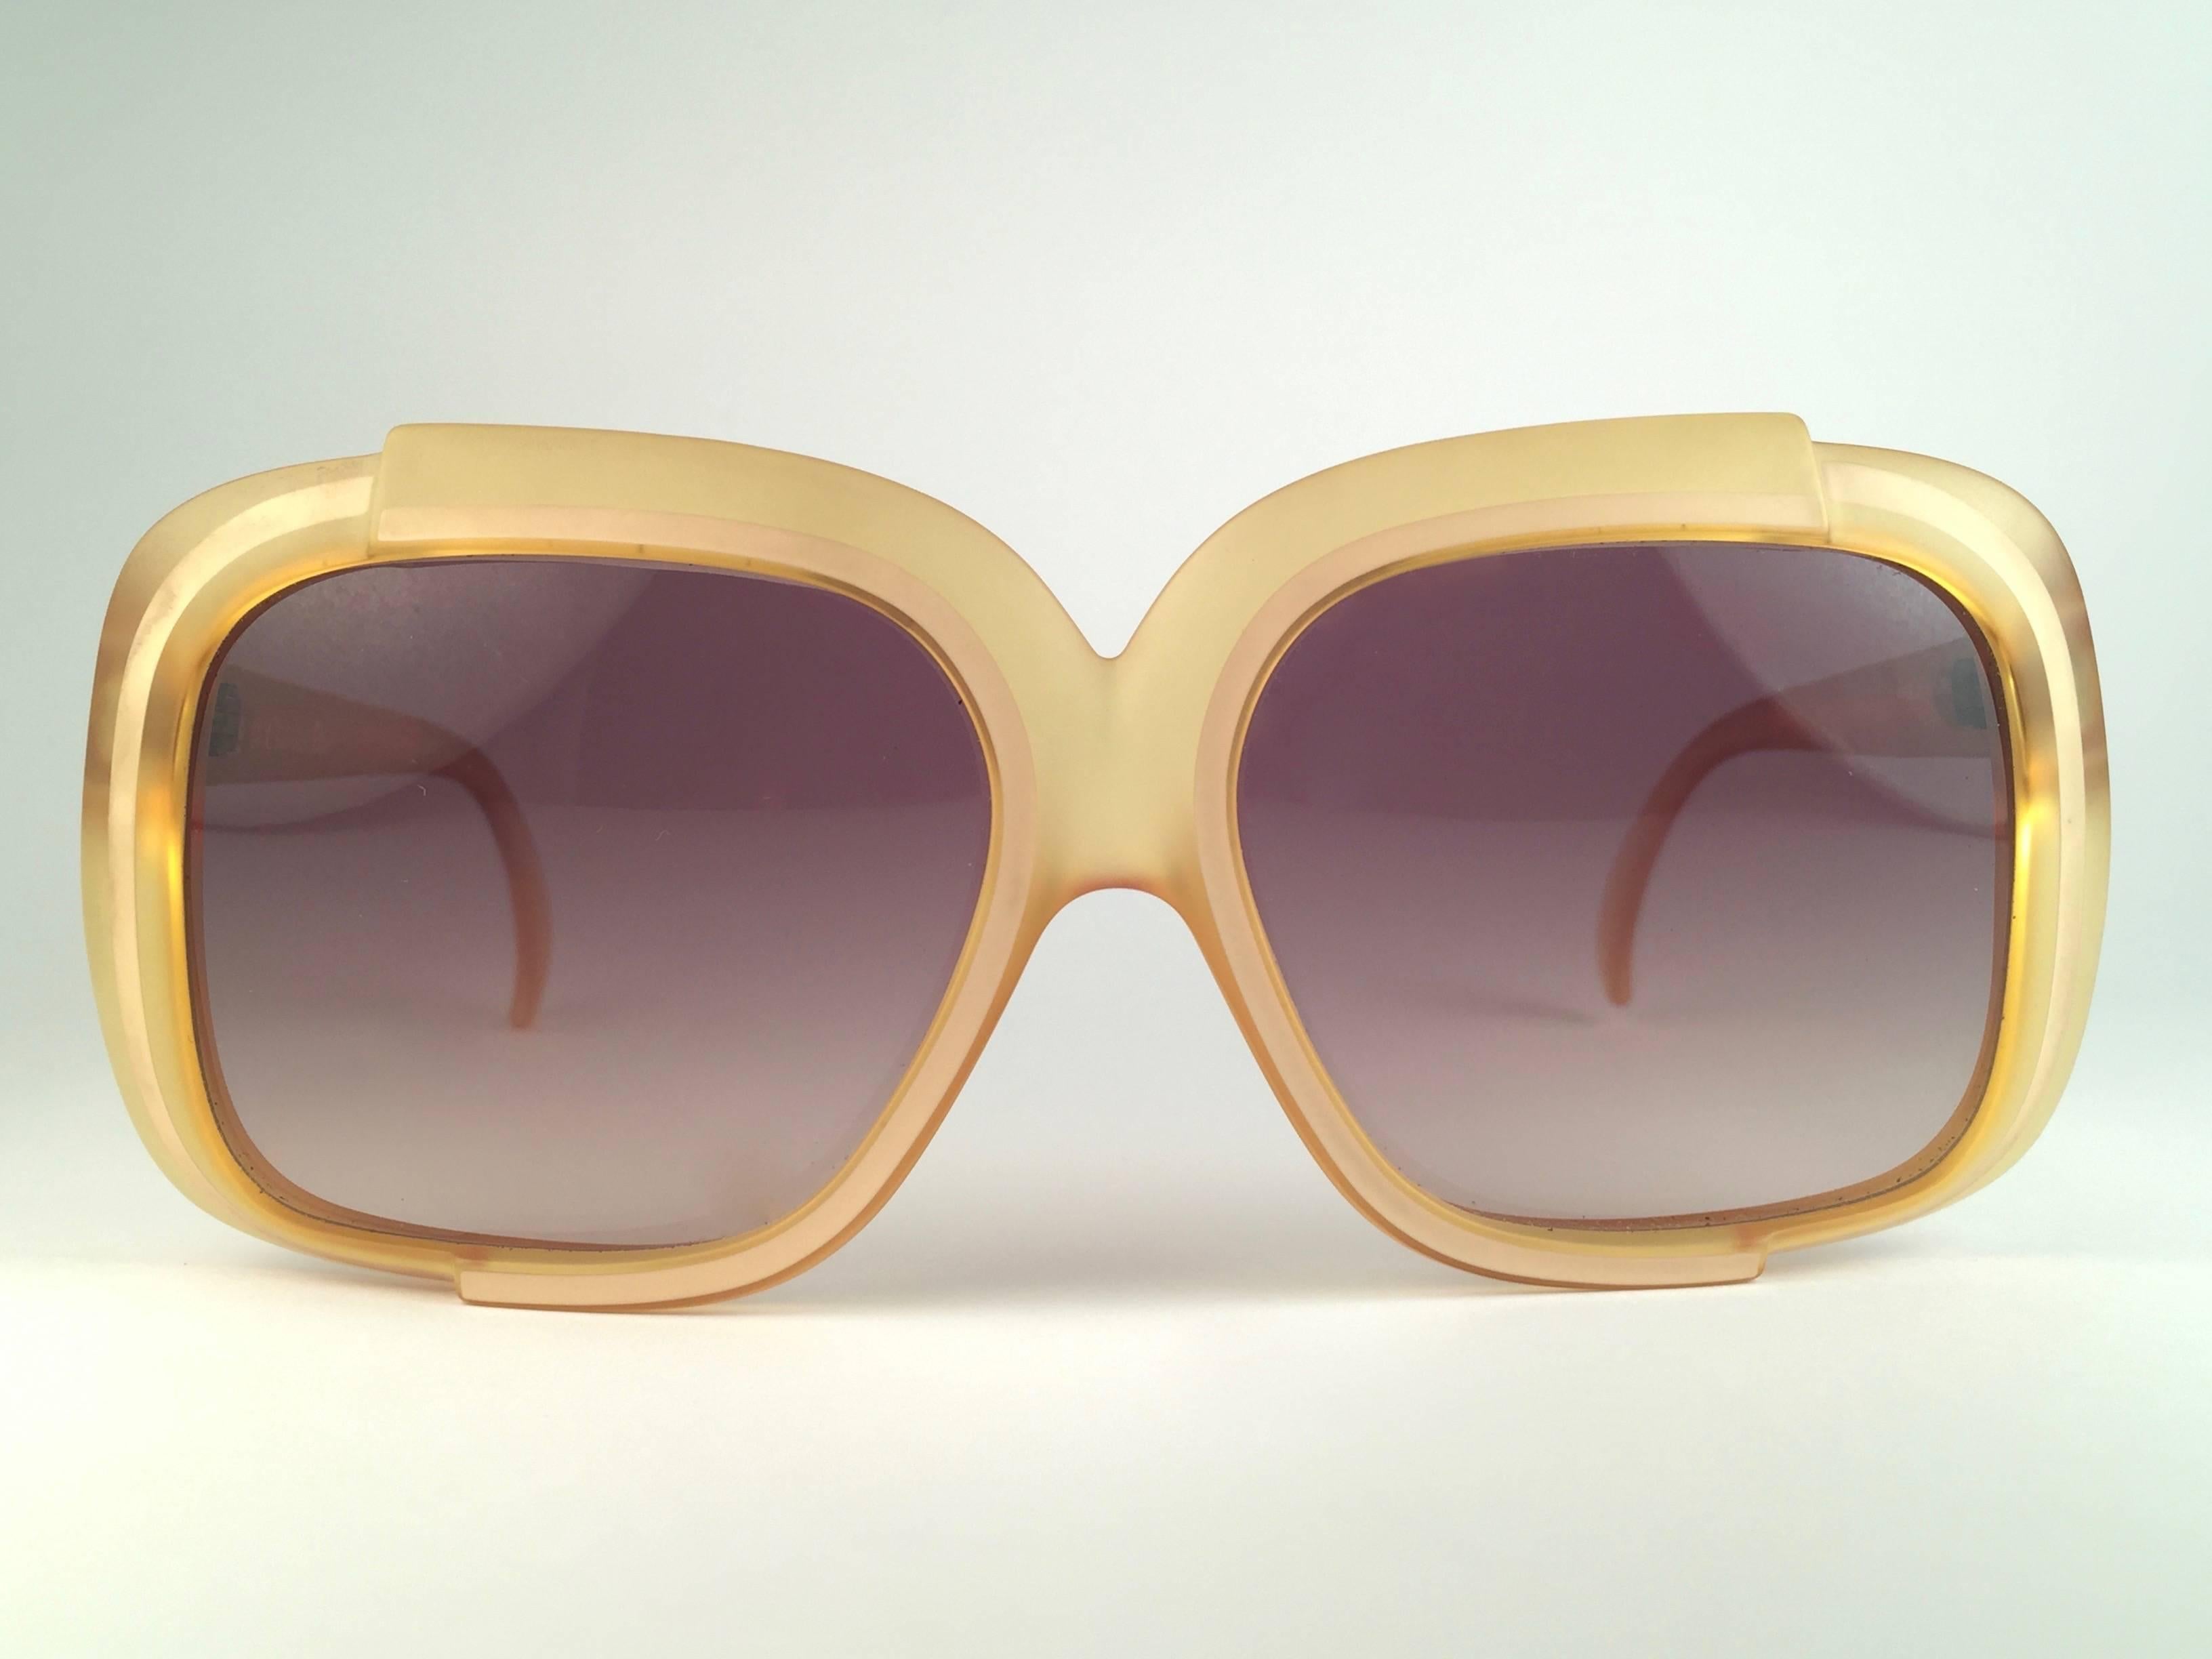 New Vintage Christian Dior 2042 70 Yellow matte with beige accents frame with spotless light brown gradient lenses. 

Made in Austria.
 
Produced and design in 1970's.

New, never worn or displayed. Comes with its original silver Christian Dior